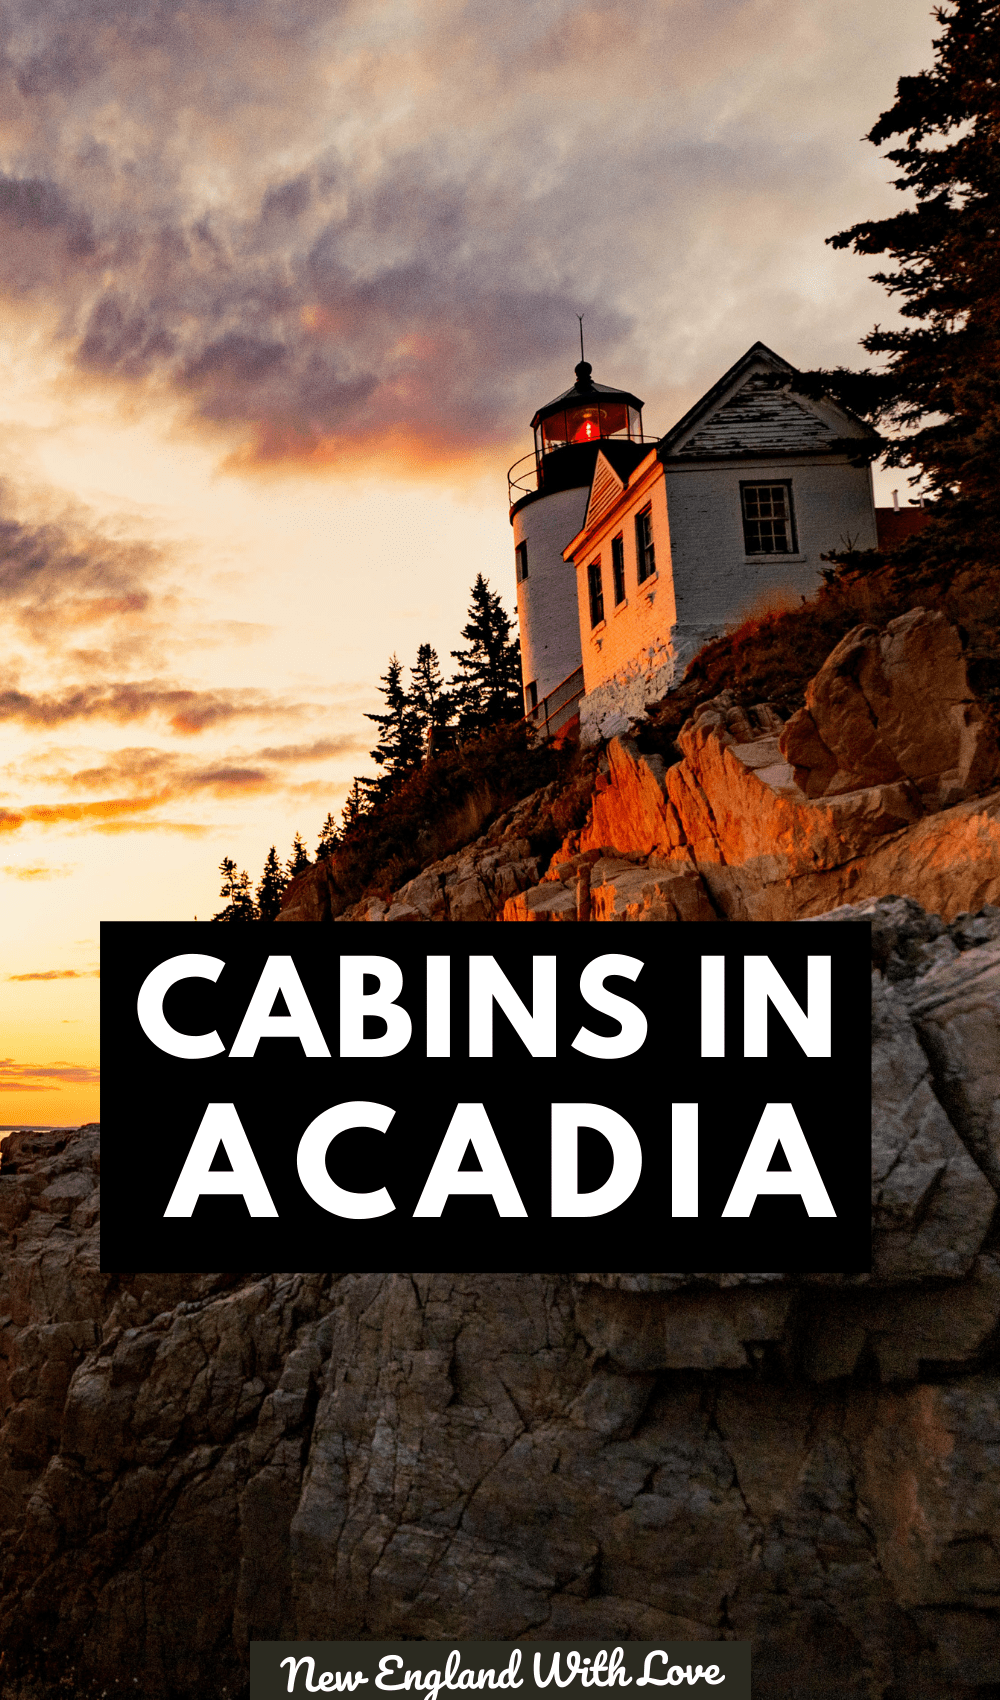 Pinterest graphic reading "CABINS IN ACADIA"